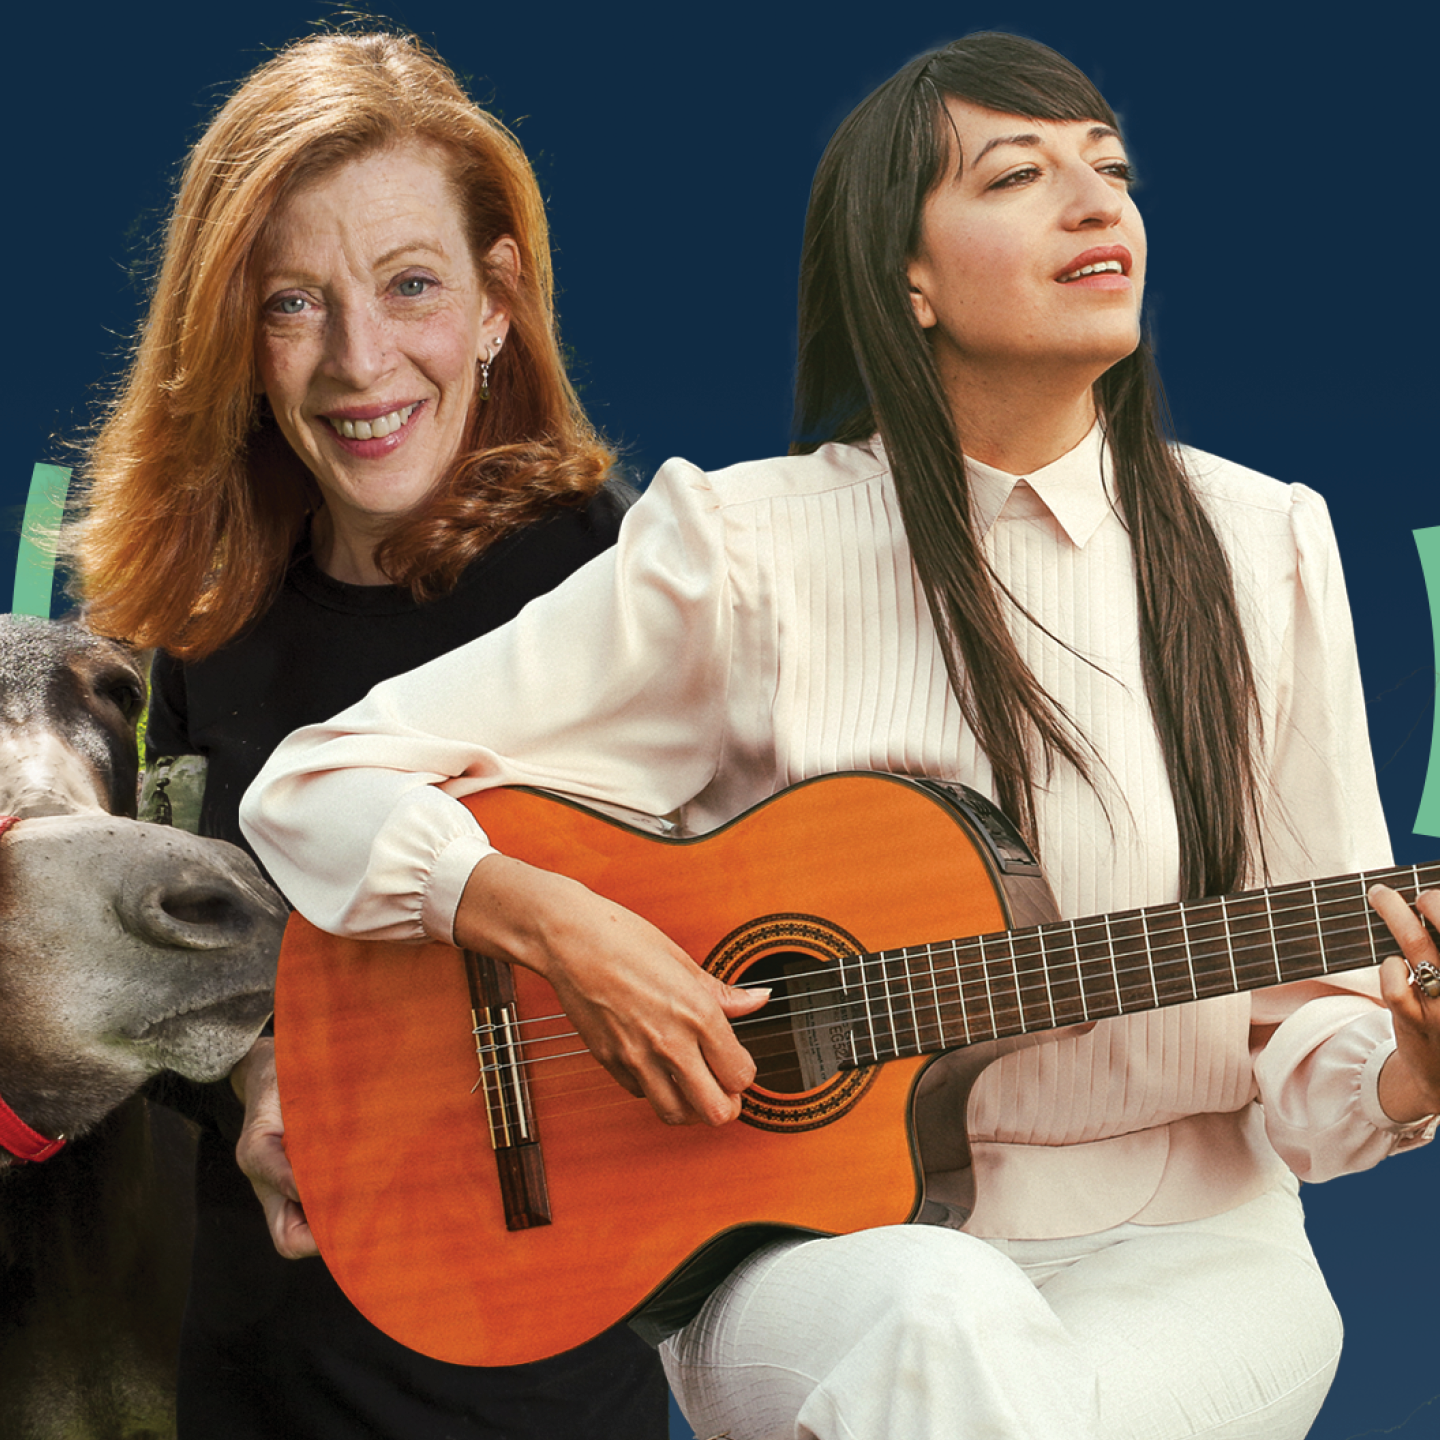 A composite photo of author Susan Orlean smiling and musician Diana Gameros playing guitar.